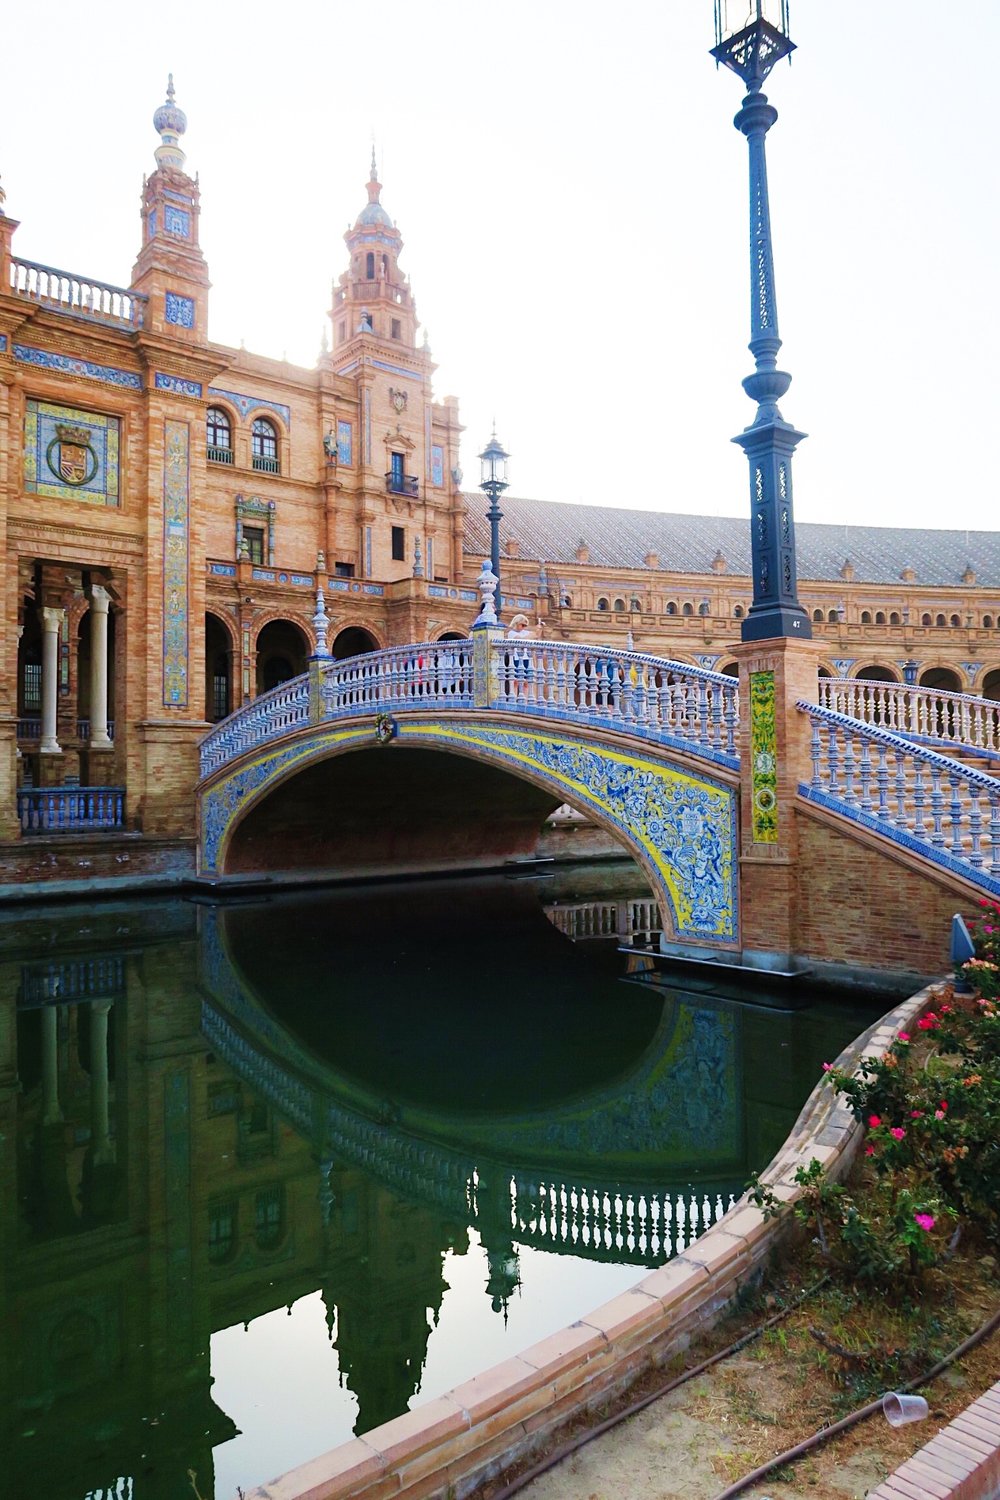 Beautiful portrait Plaza de espana in Seville from Sincerely Yours Susie blog. Photo credit Susie Cormack Bruce